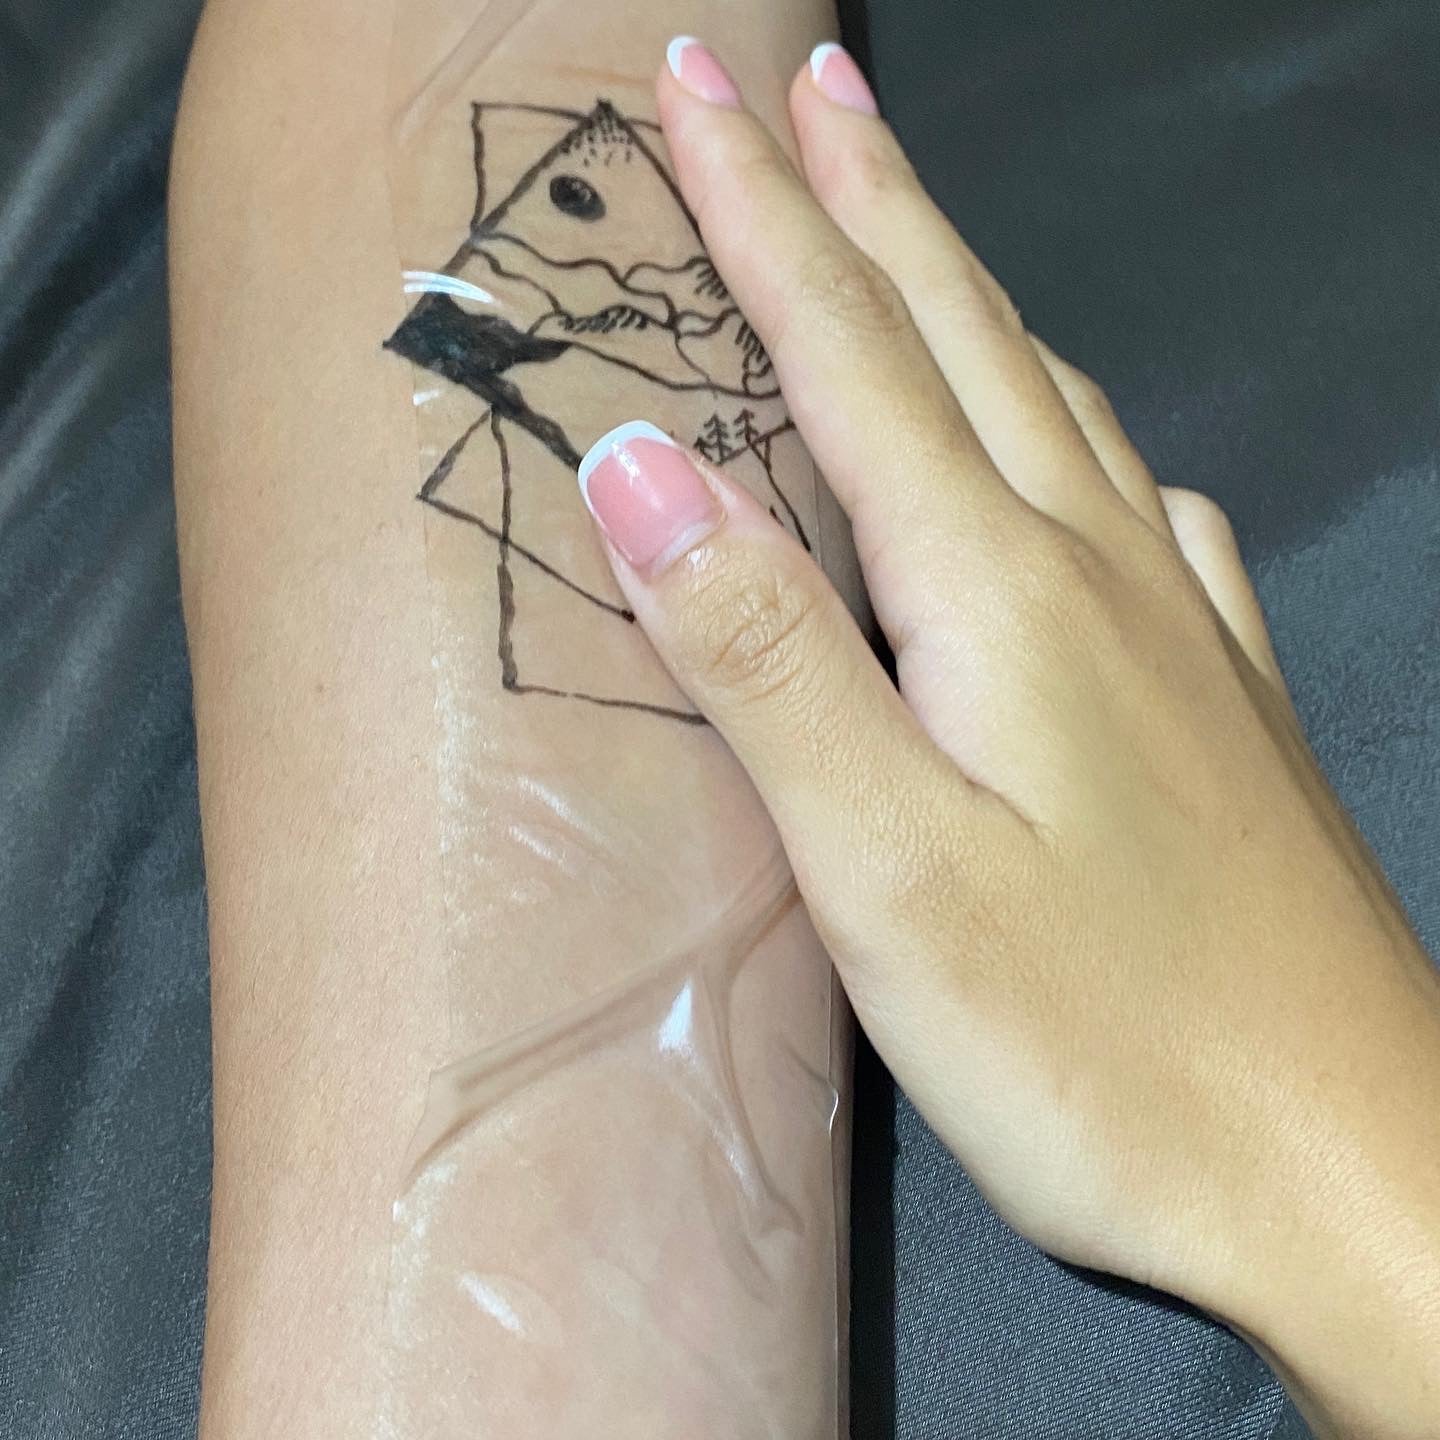 Why PU Bandage Tape is the best bandage for new tattoos?